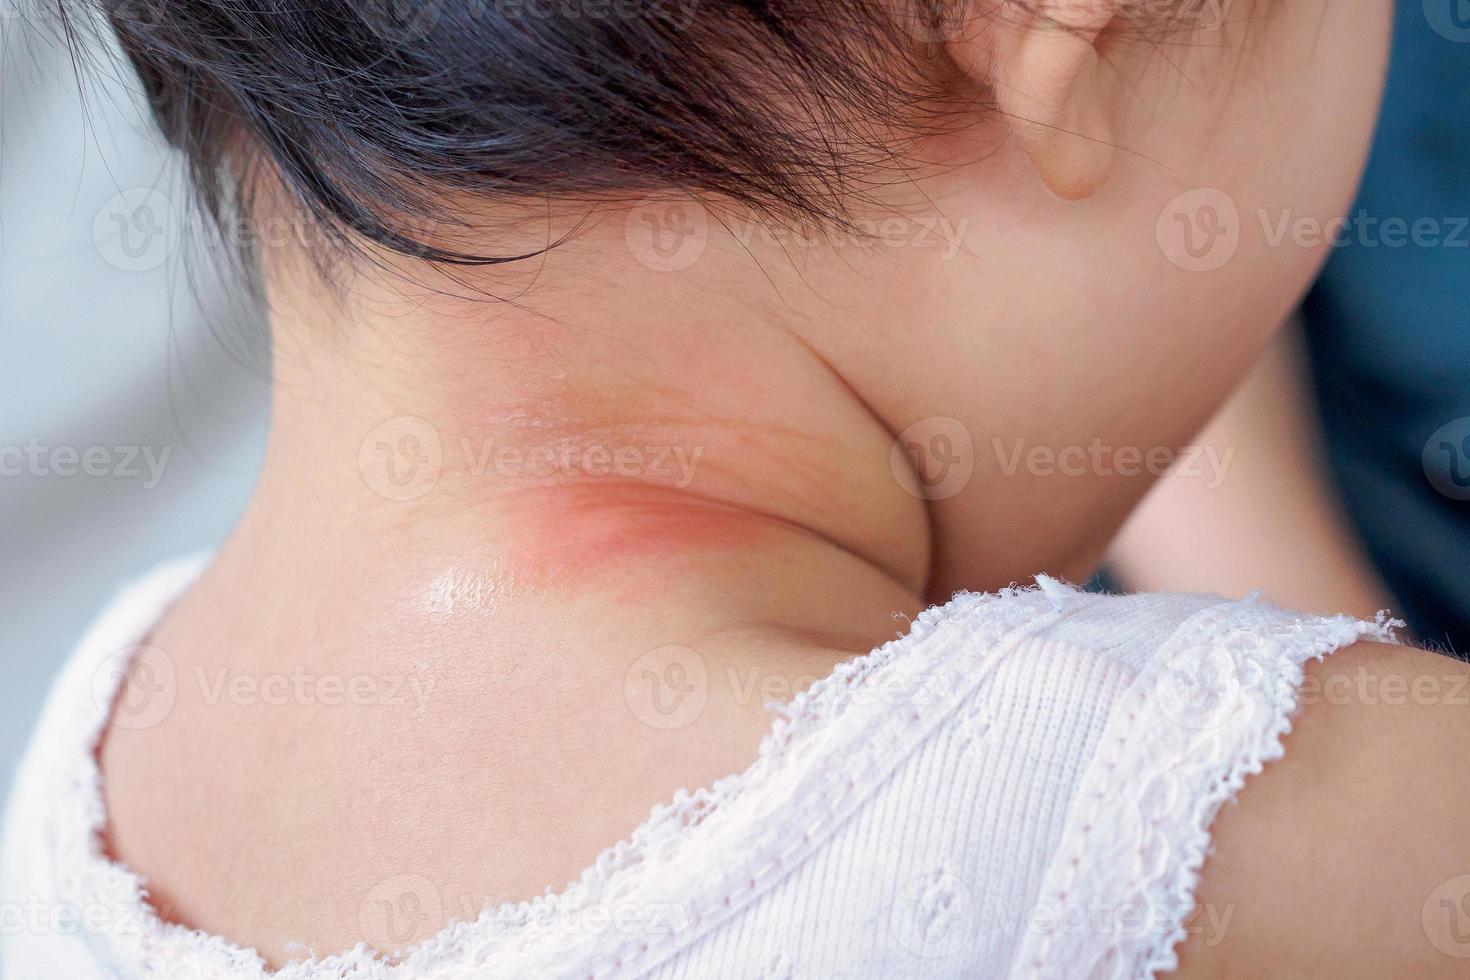 baby skin rash and allergy with red spot cause by mosquito bite at neck photo